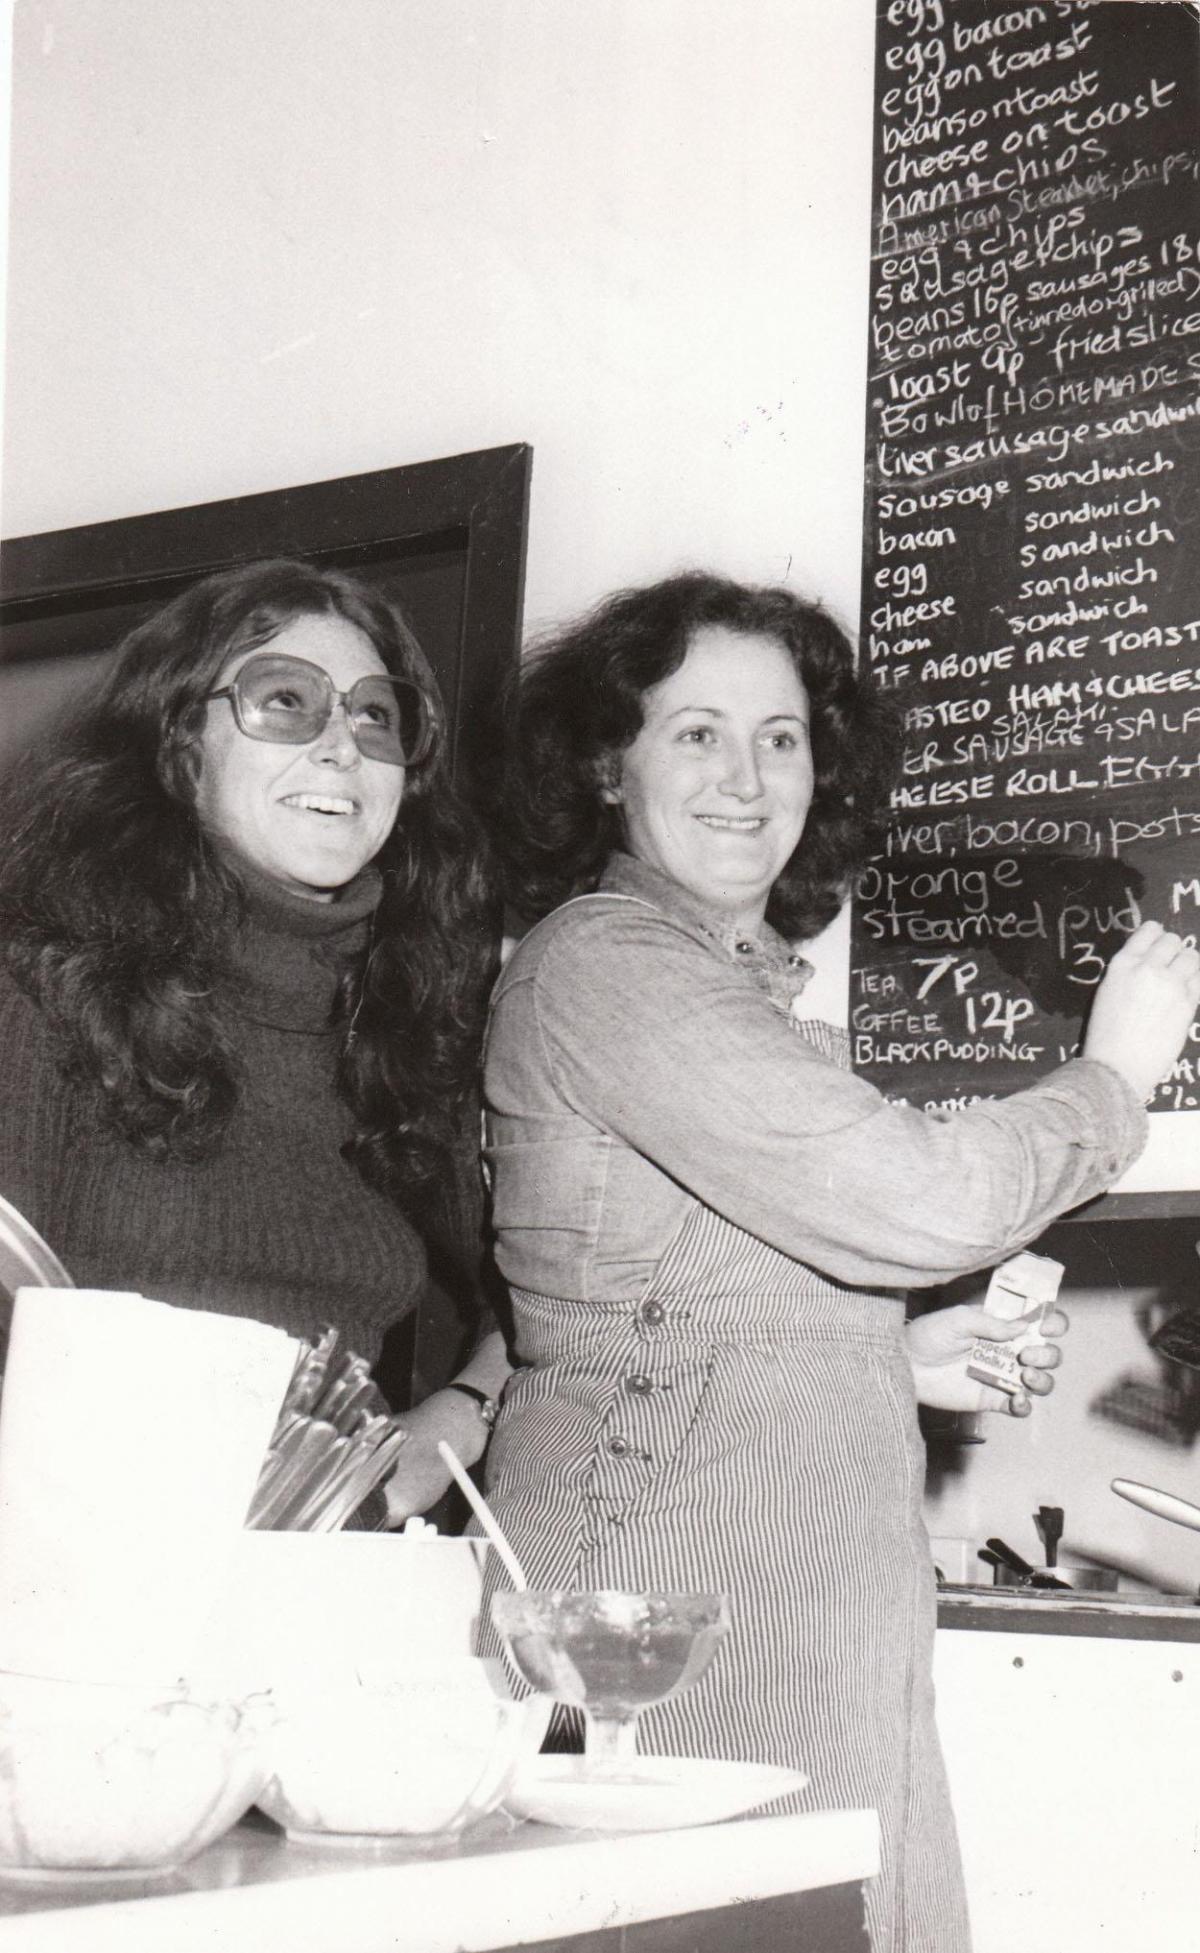 Stephanie Shepherd and Mandy McDowall at the Pantry Cafe in Swanage in 1977.